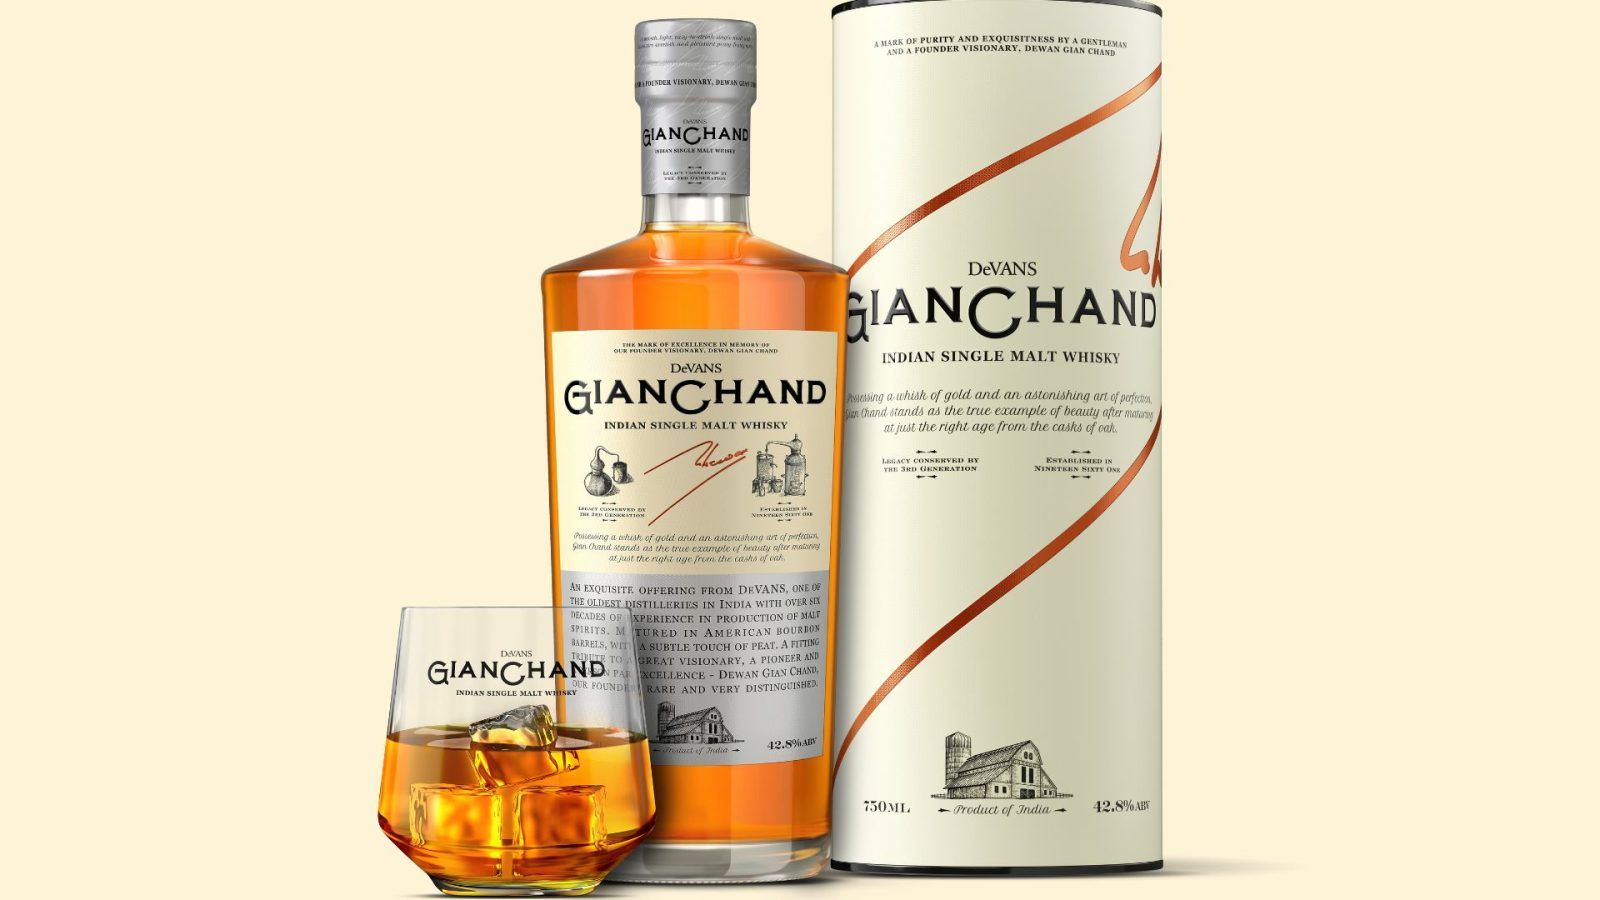 5 must-try Indian whisky brands to try this New Year's Eve